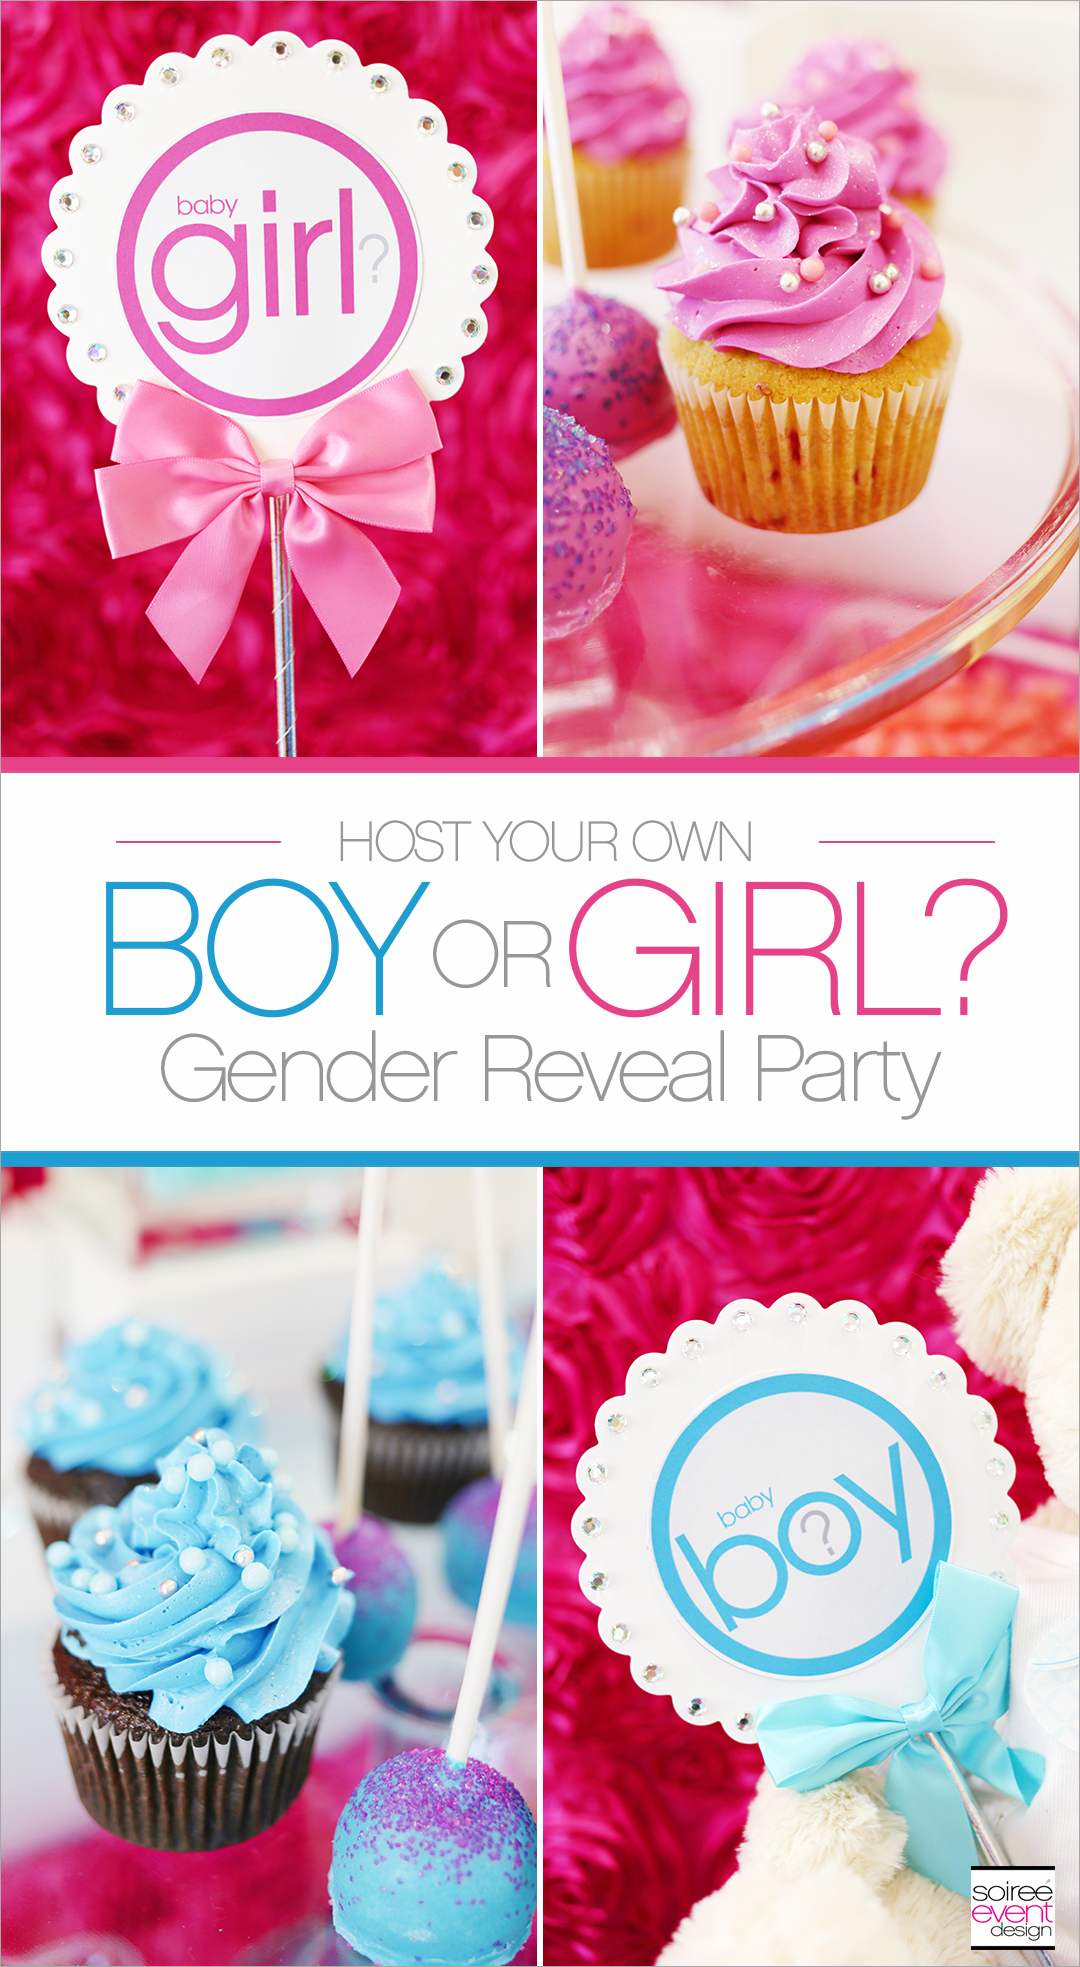 How to Host a Gender Reveal Party 1